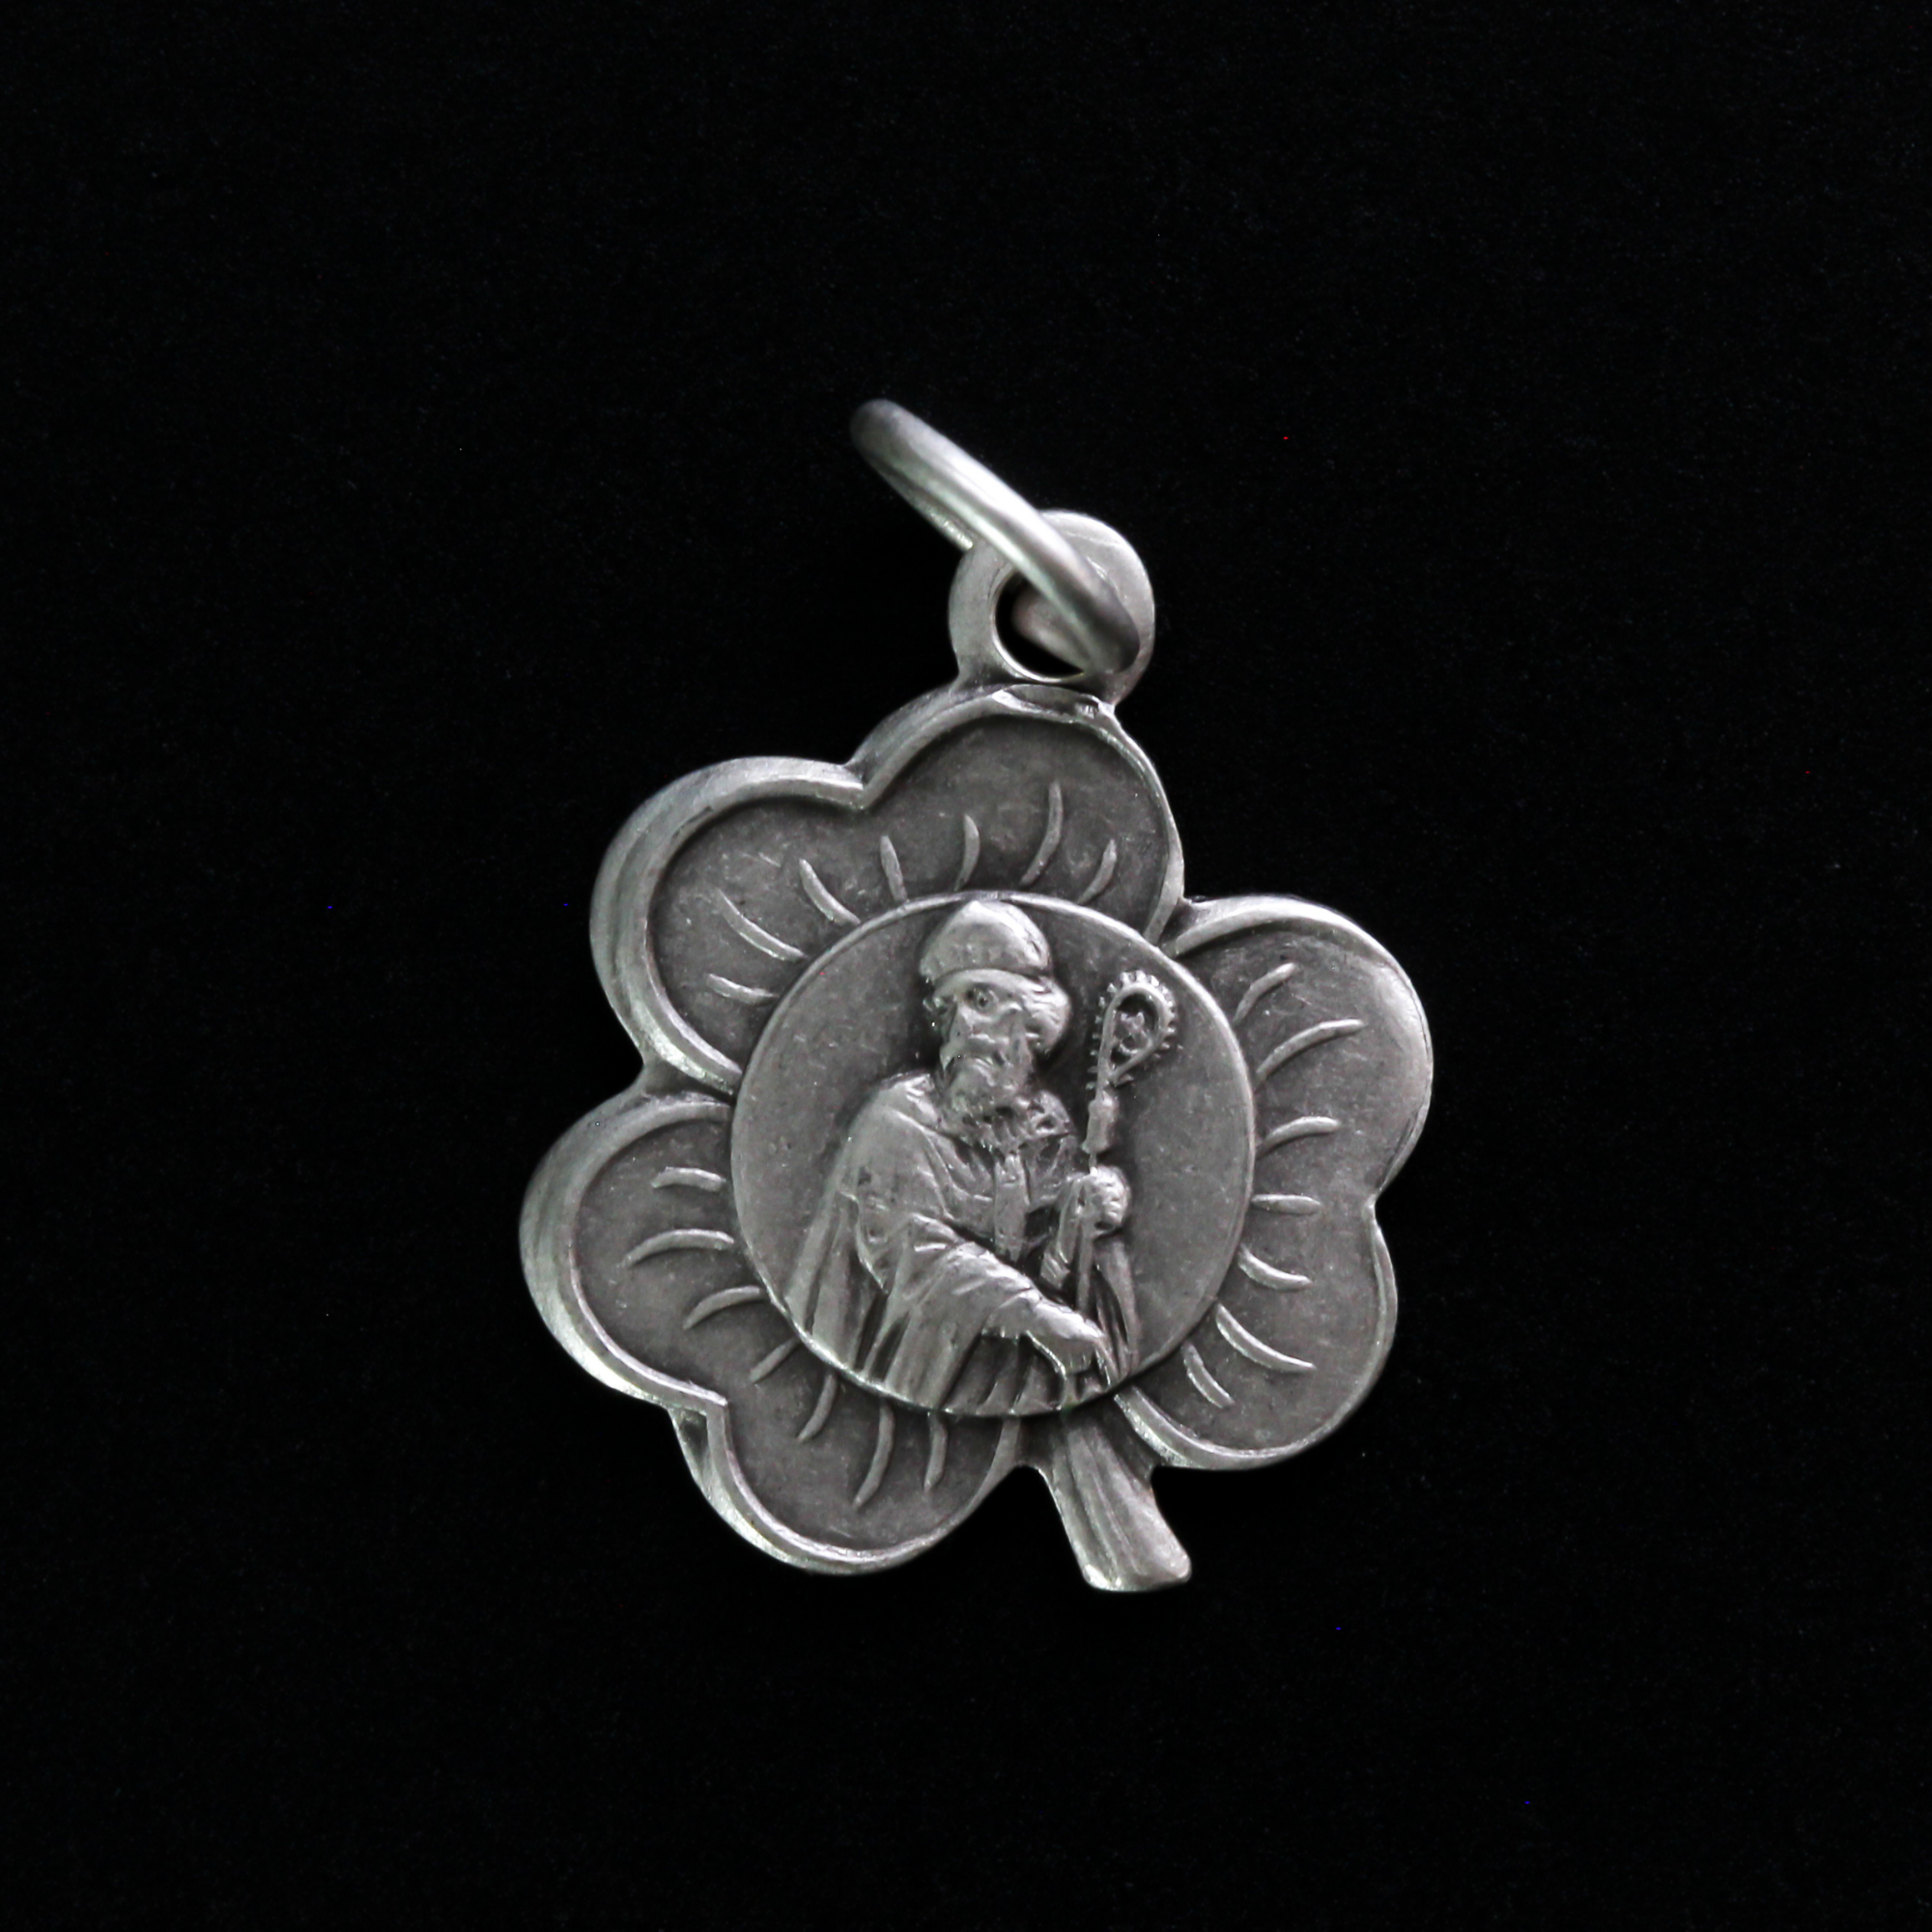 Small silver-tone St. Patrick shamrock-shaped charm. The front depicts Saint Patrick and the reverse is marked "Saint Patrick"